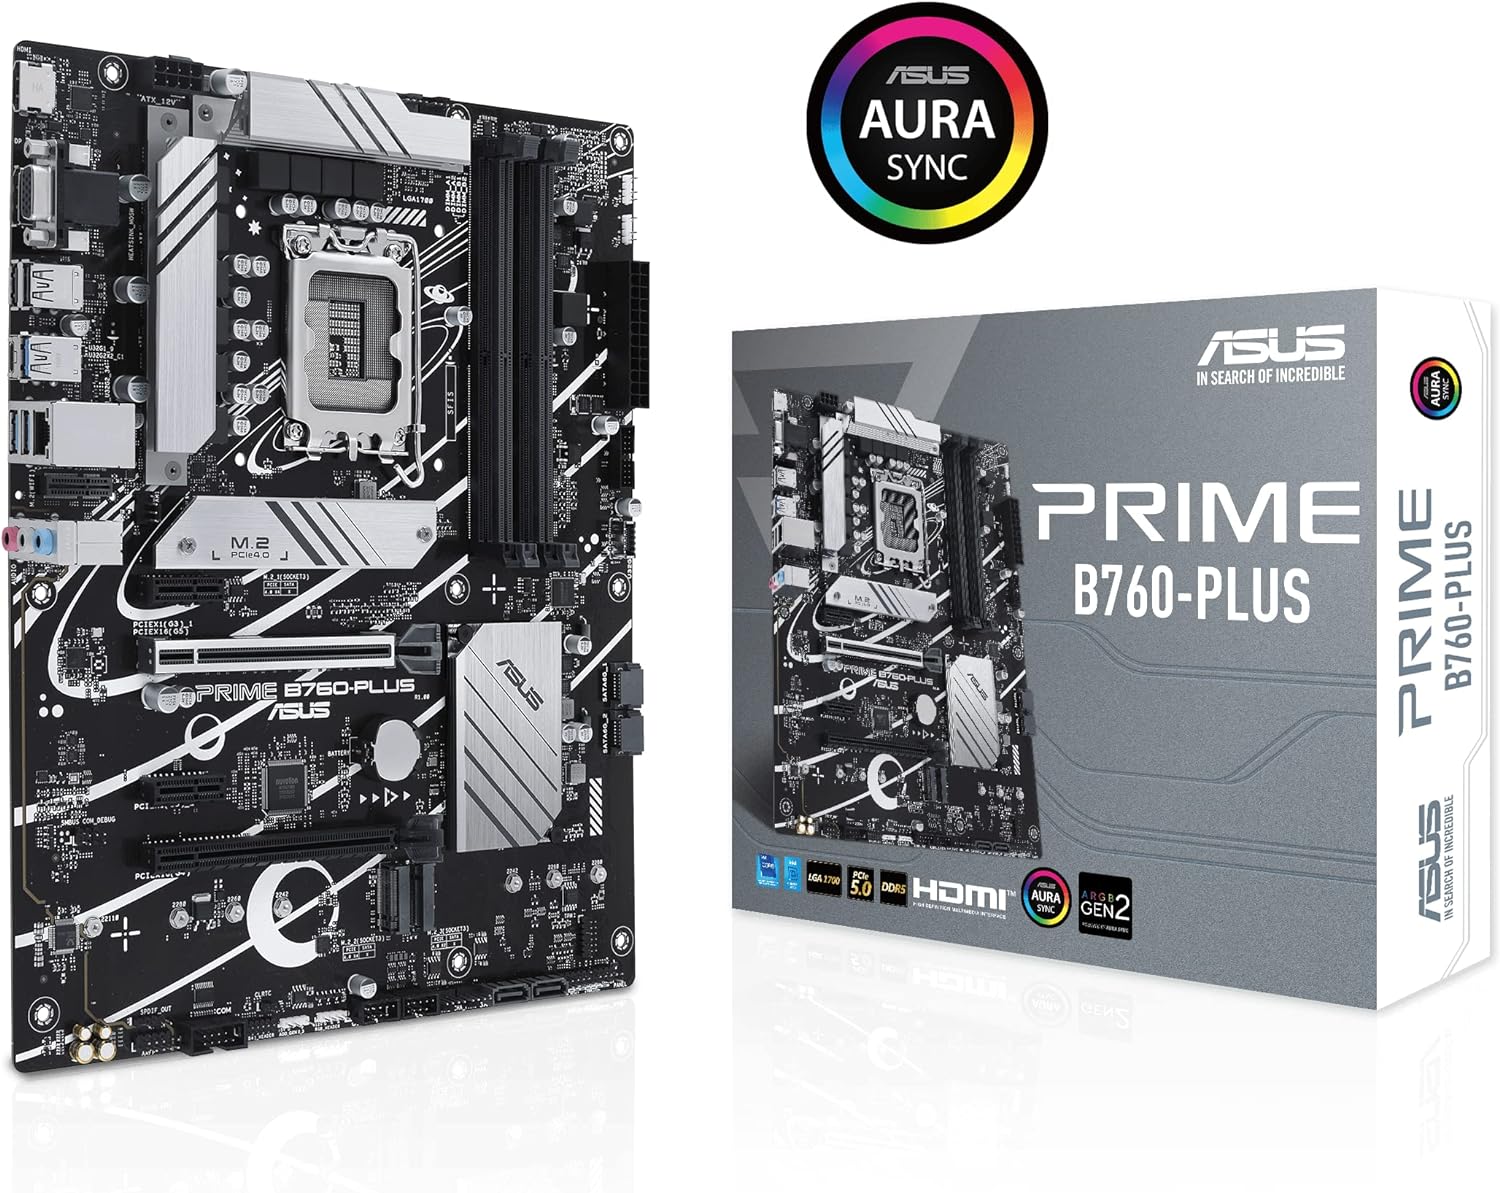 High-Performance ASUS Prime B760-PLUS Motherboard with DDR5 Support 0197105102989